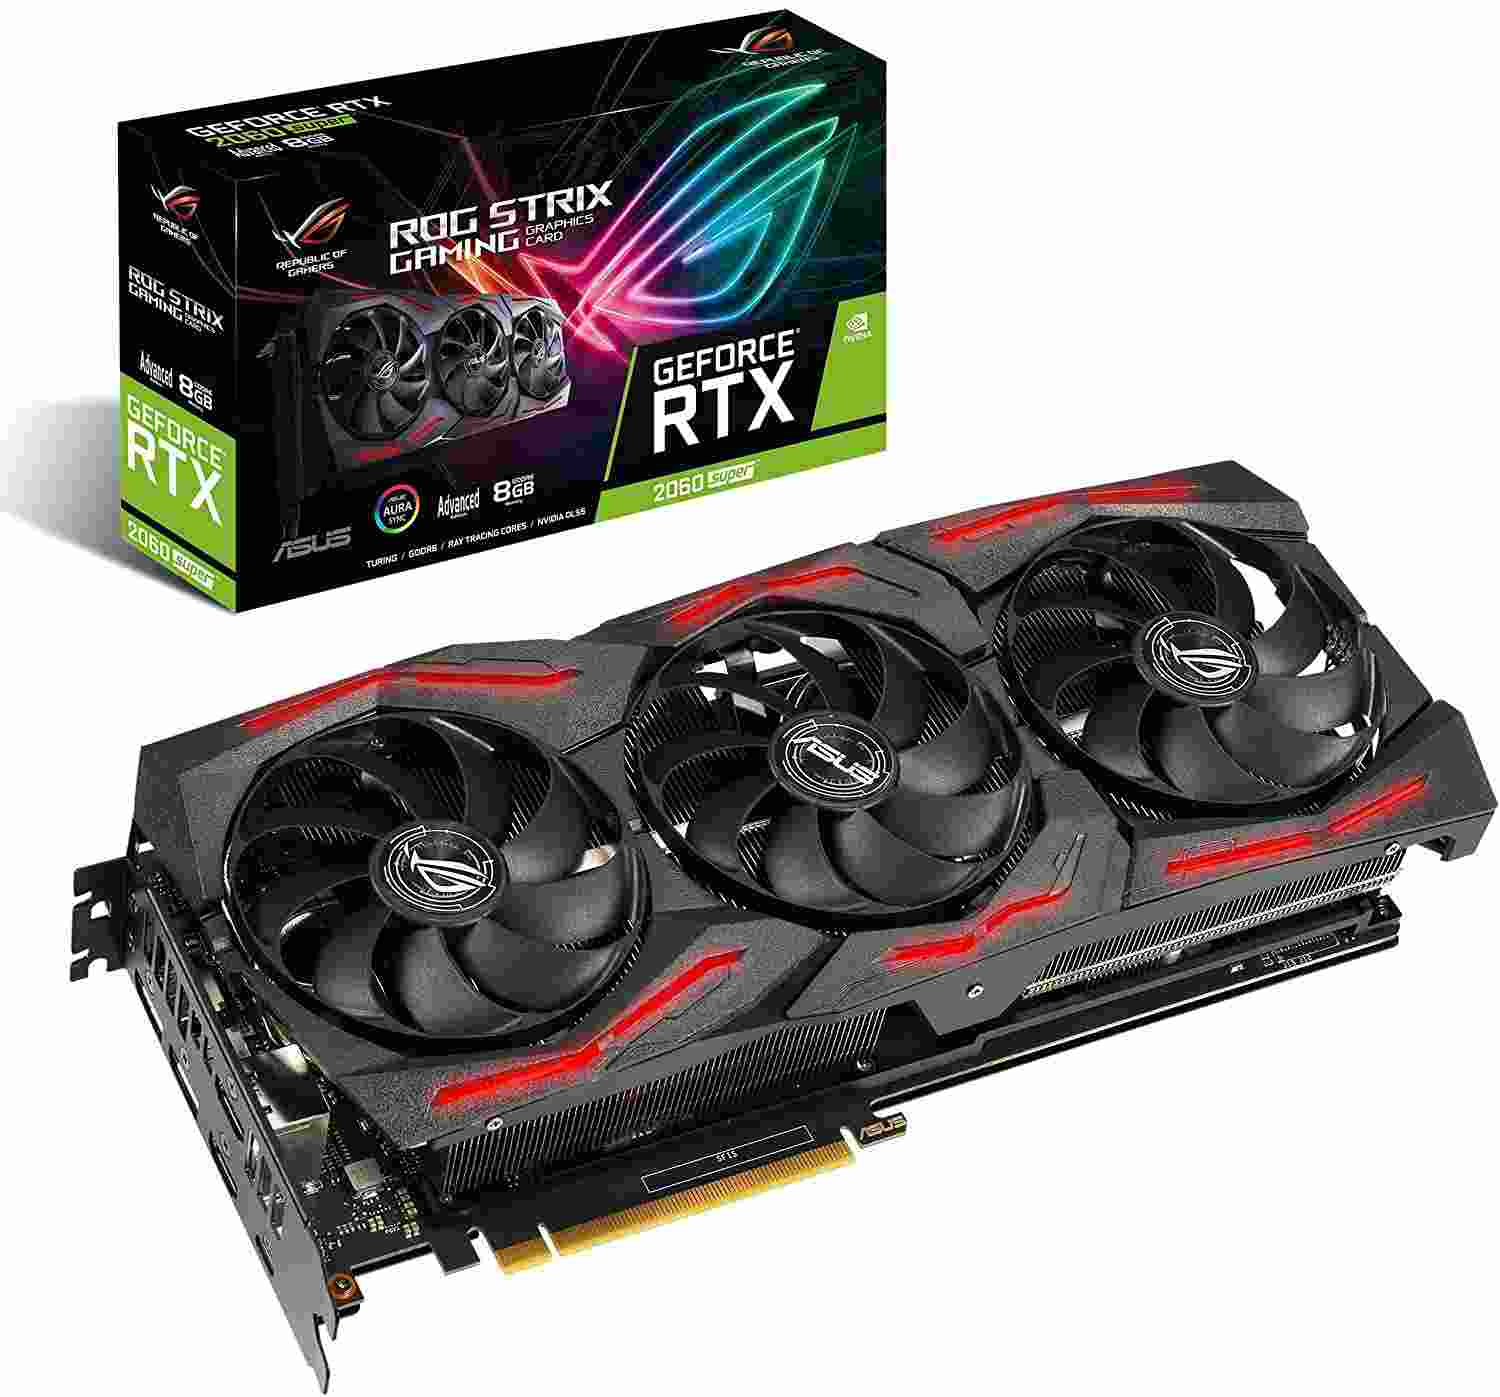 Asus - best graphics card for rendering